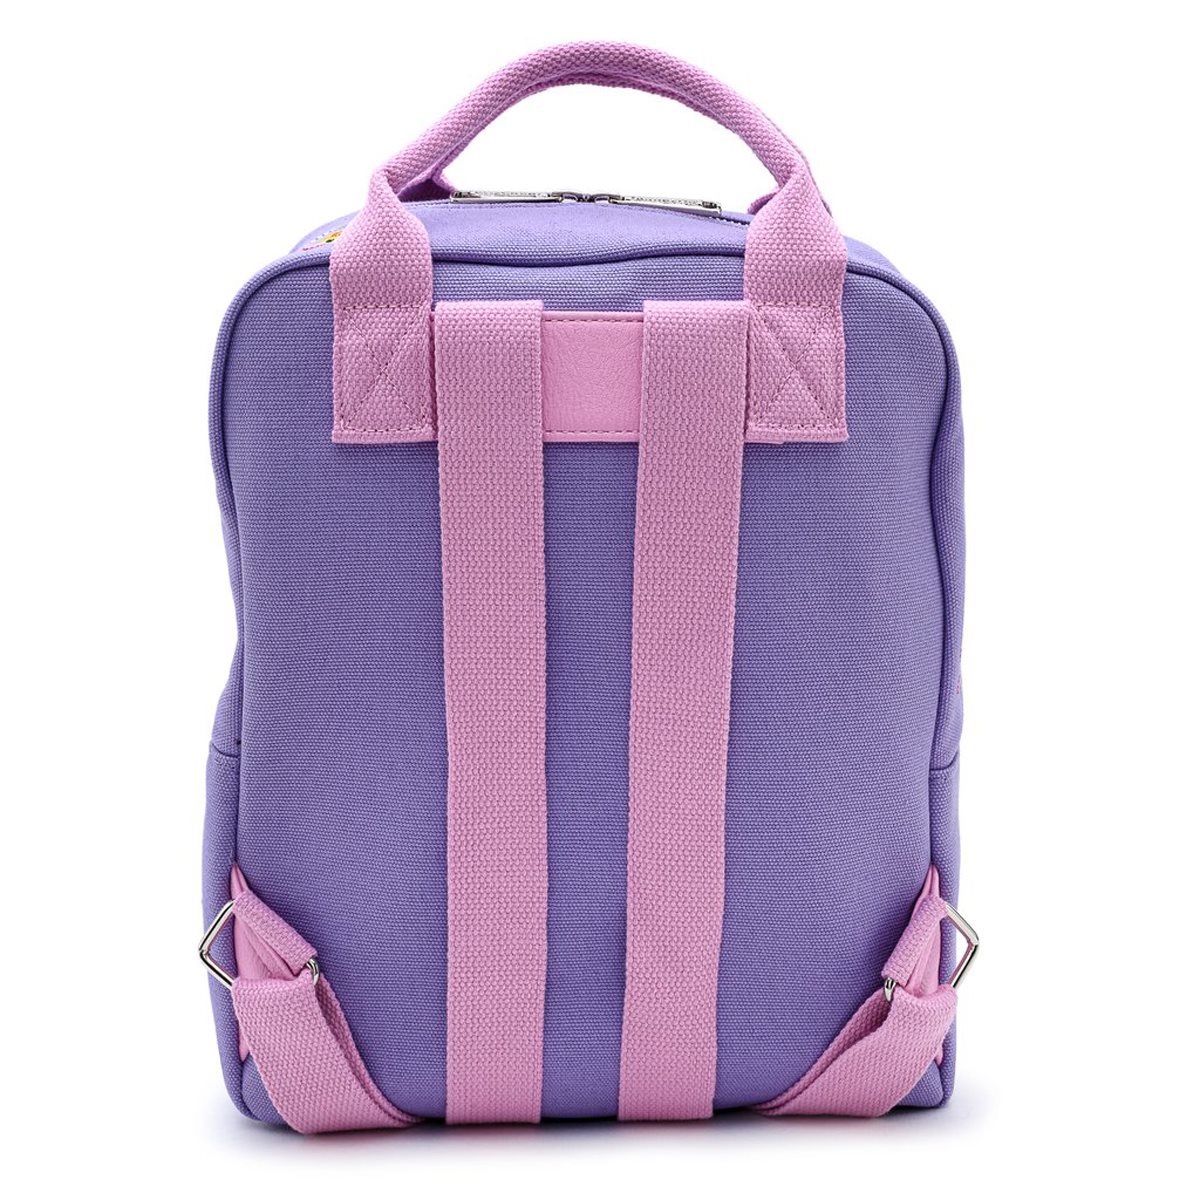 journey backpack ditzy daisy